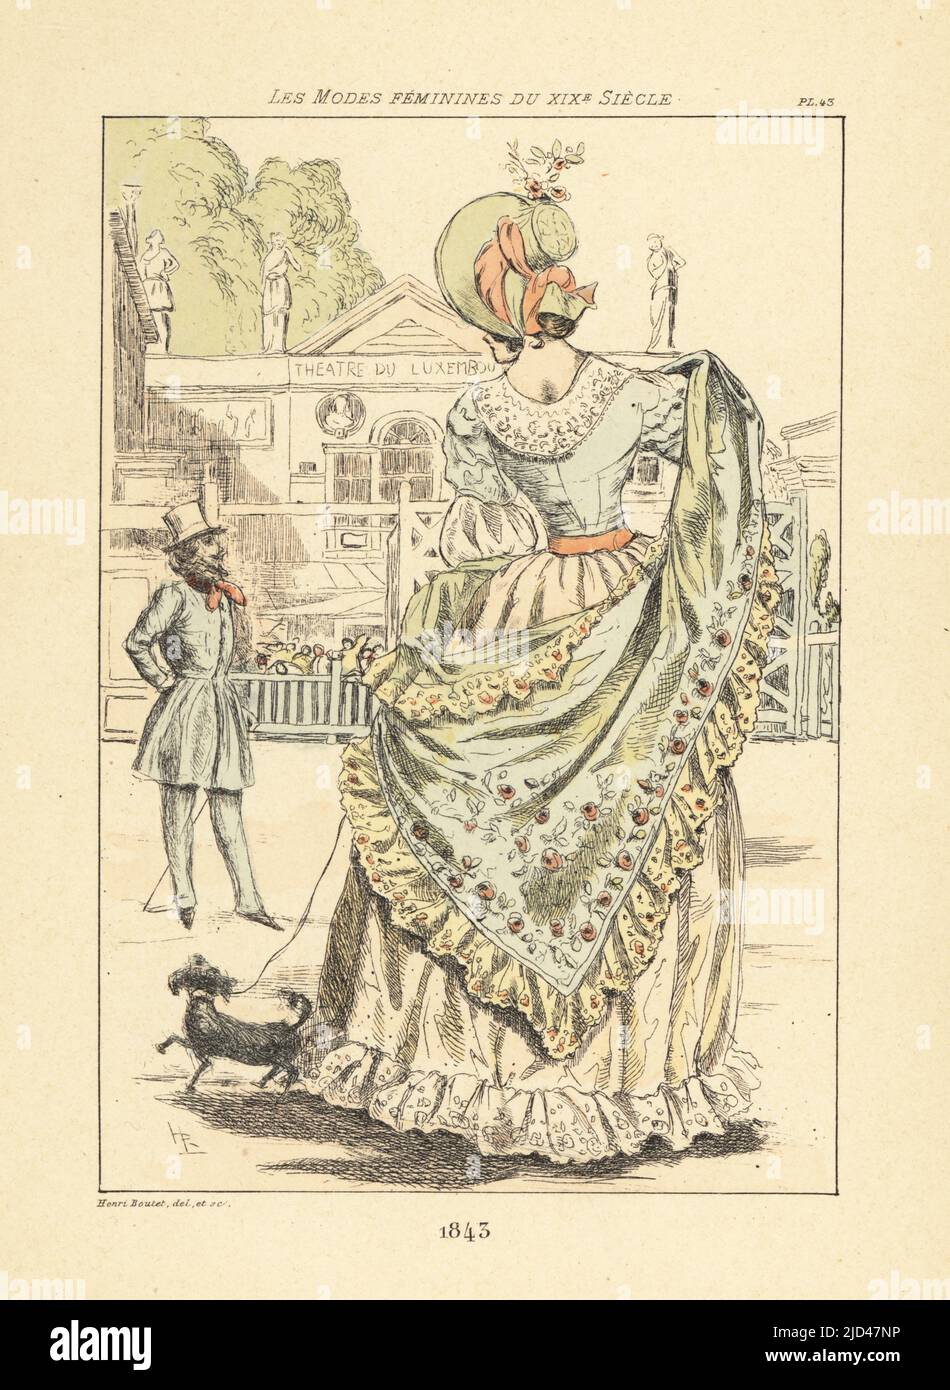 Fashionable woman in front of the Theatre du Luxembourg in the Jardins du Luxembourg, Paris, 1843. Founded by Bobino in the 1810s, the theatre specialized in acrobatics, pantomime, juggling and rope dancing. In bonnet, frilled dress, with shawl and lapdog. Handcoloured drypoint or pointe-seche etching by Henri Boutet from Les Modes Feminines du XIXeme Siecle (Female Fashions of the 19th Century), Ernest Flammarion, Paris, 1902. Boutet (1851-1919) was a French artist, engraver, lithographer and designer. Stock Photo